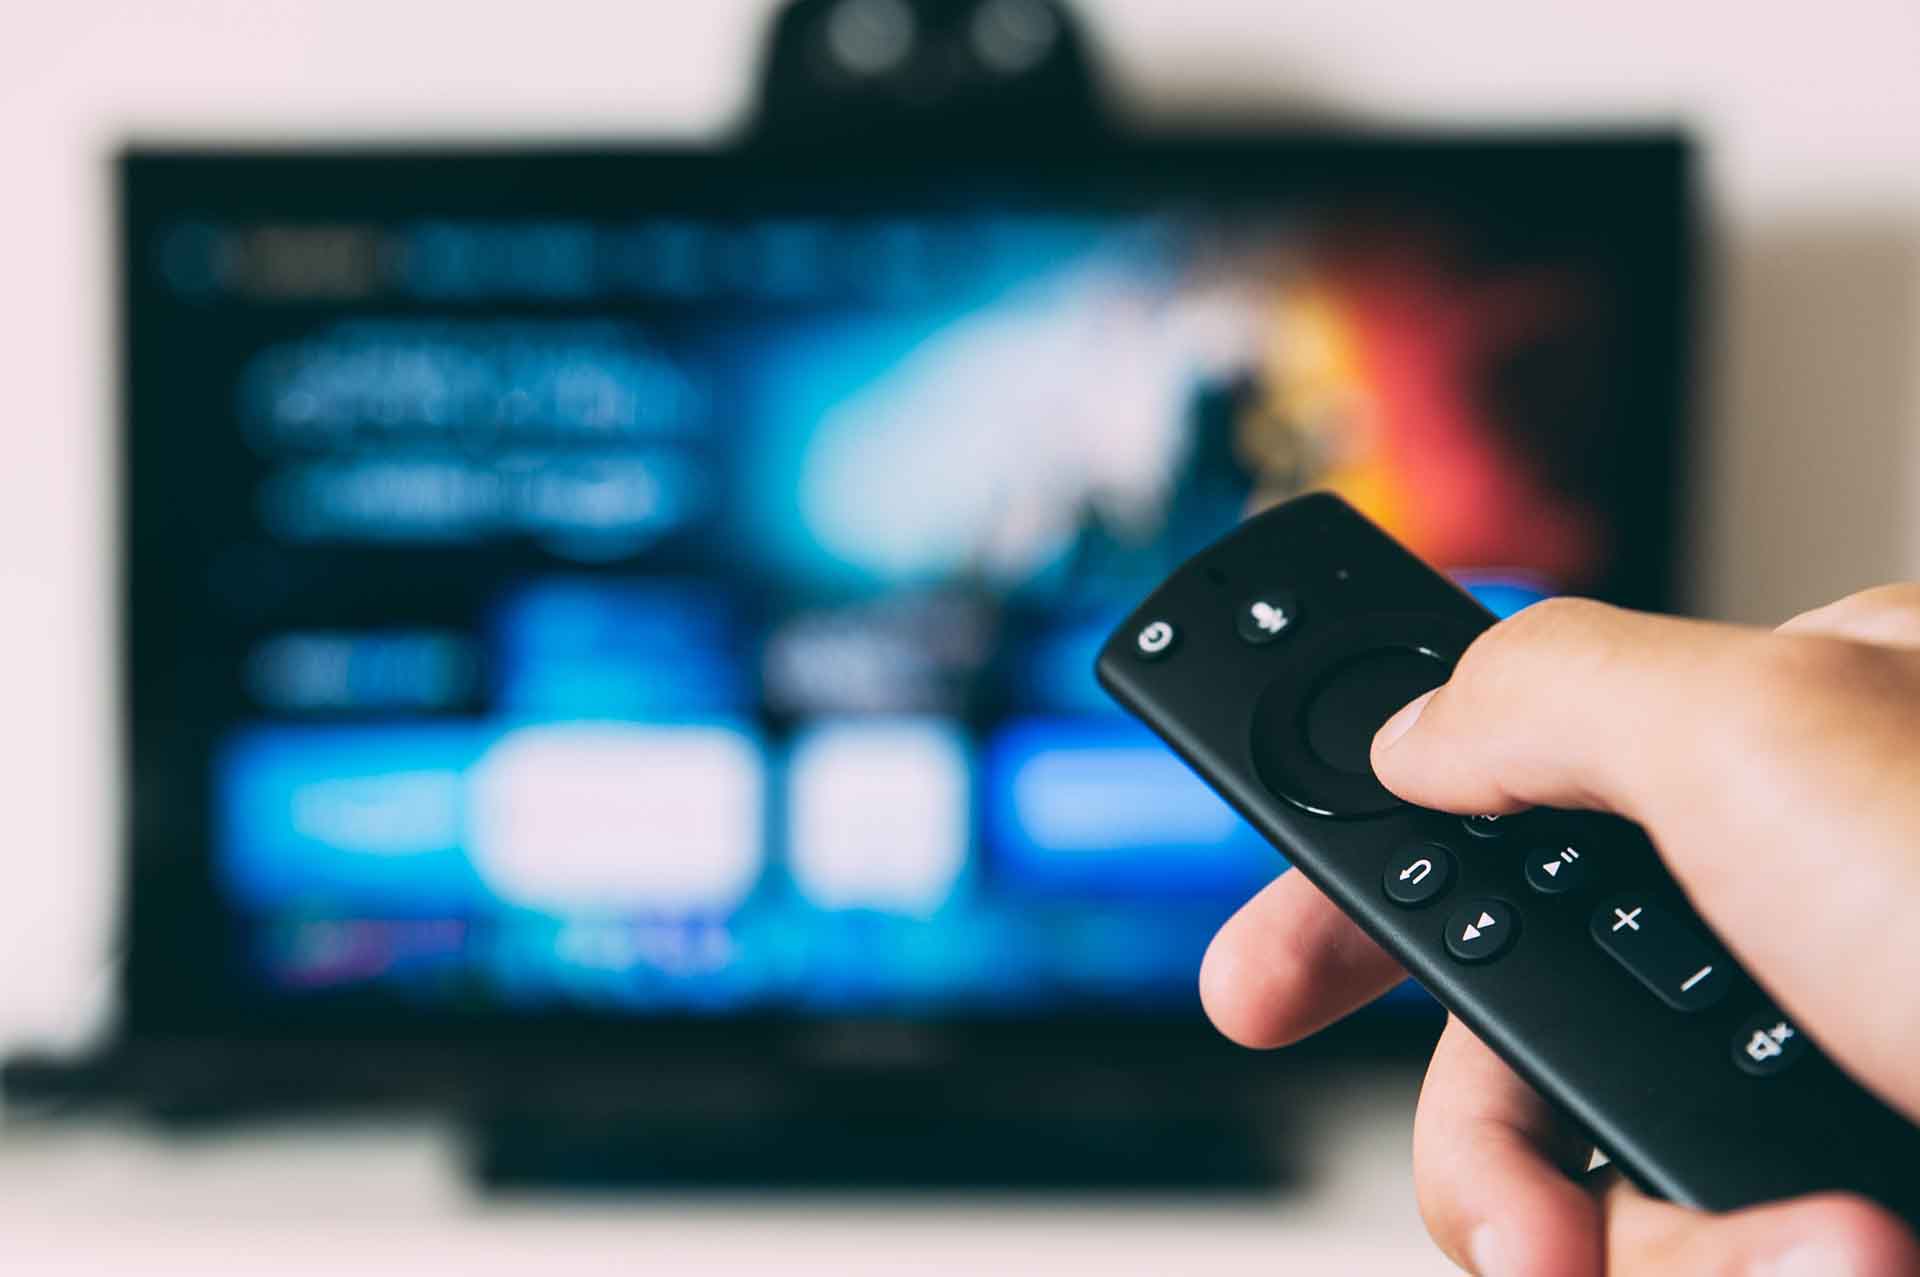 Analysis: Owning or Streaming Video